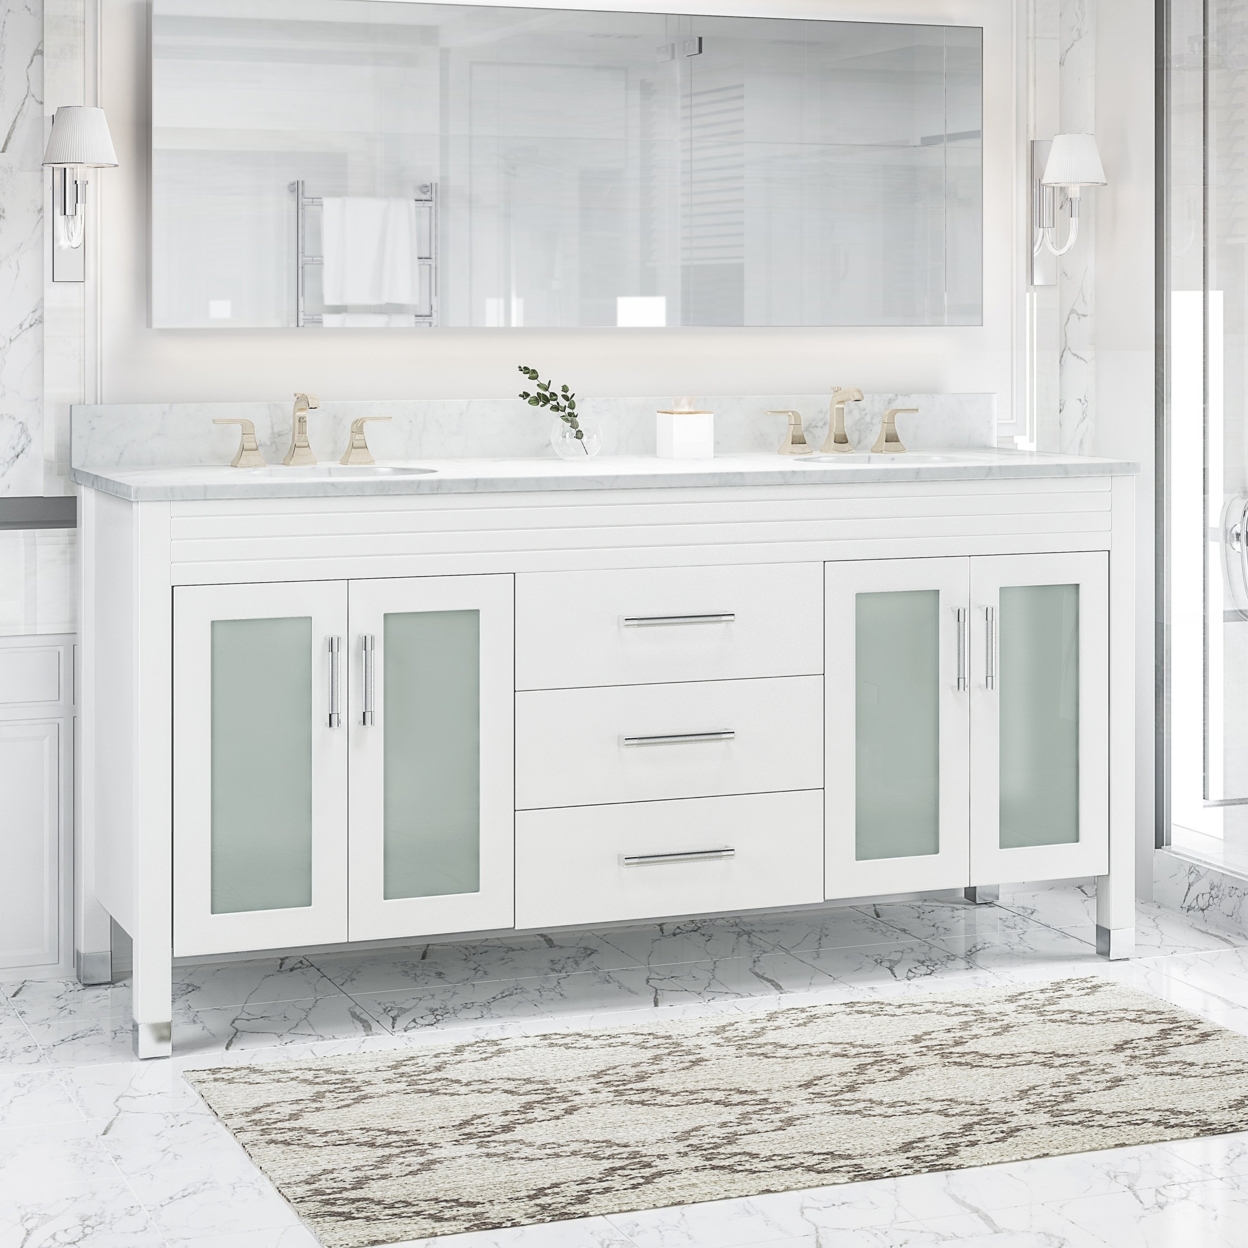 Holdame Contemporary 72 Wood Bathroom Vanity (Counter Top Not Included) - White